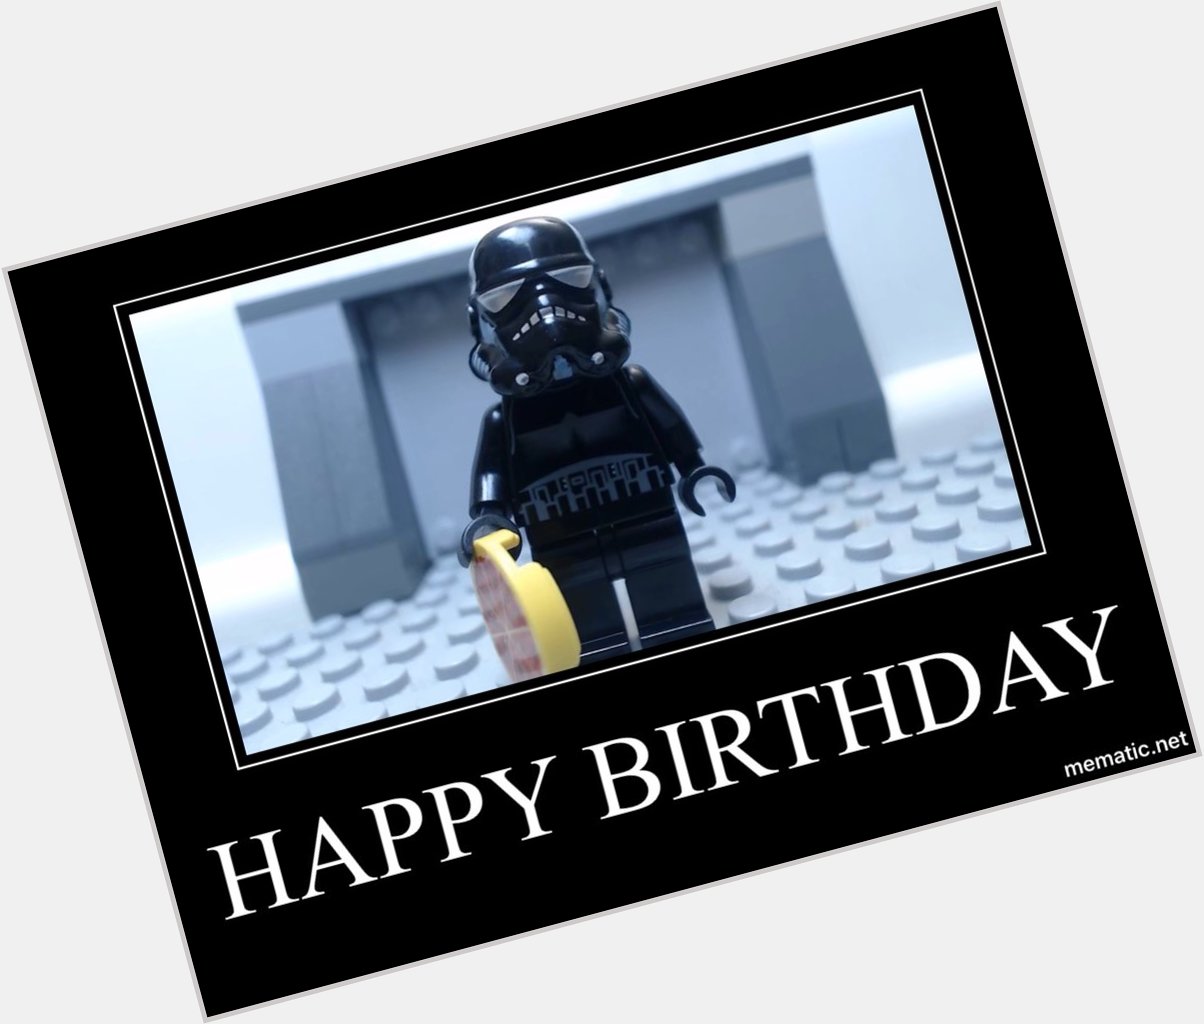  Happy birthday to the one and only Black Stormtrooper  